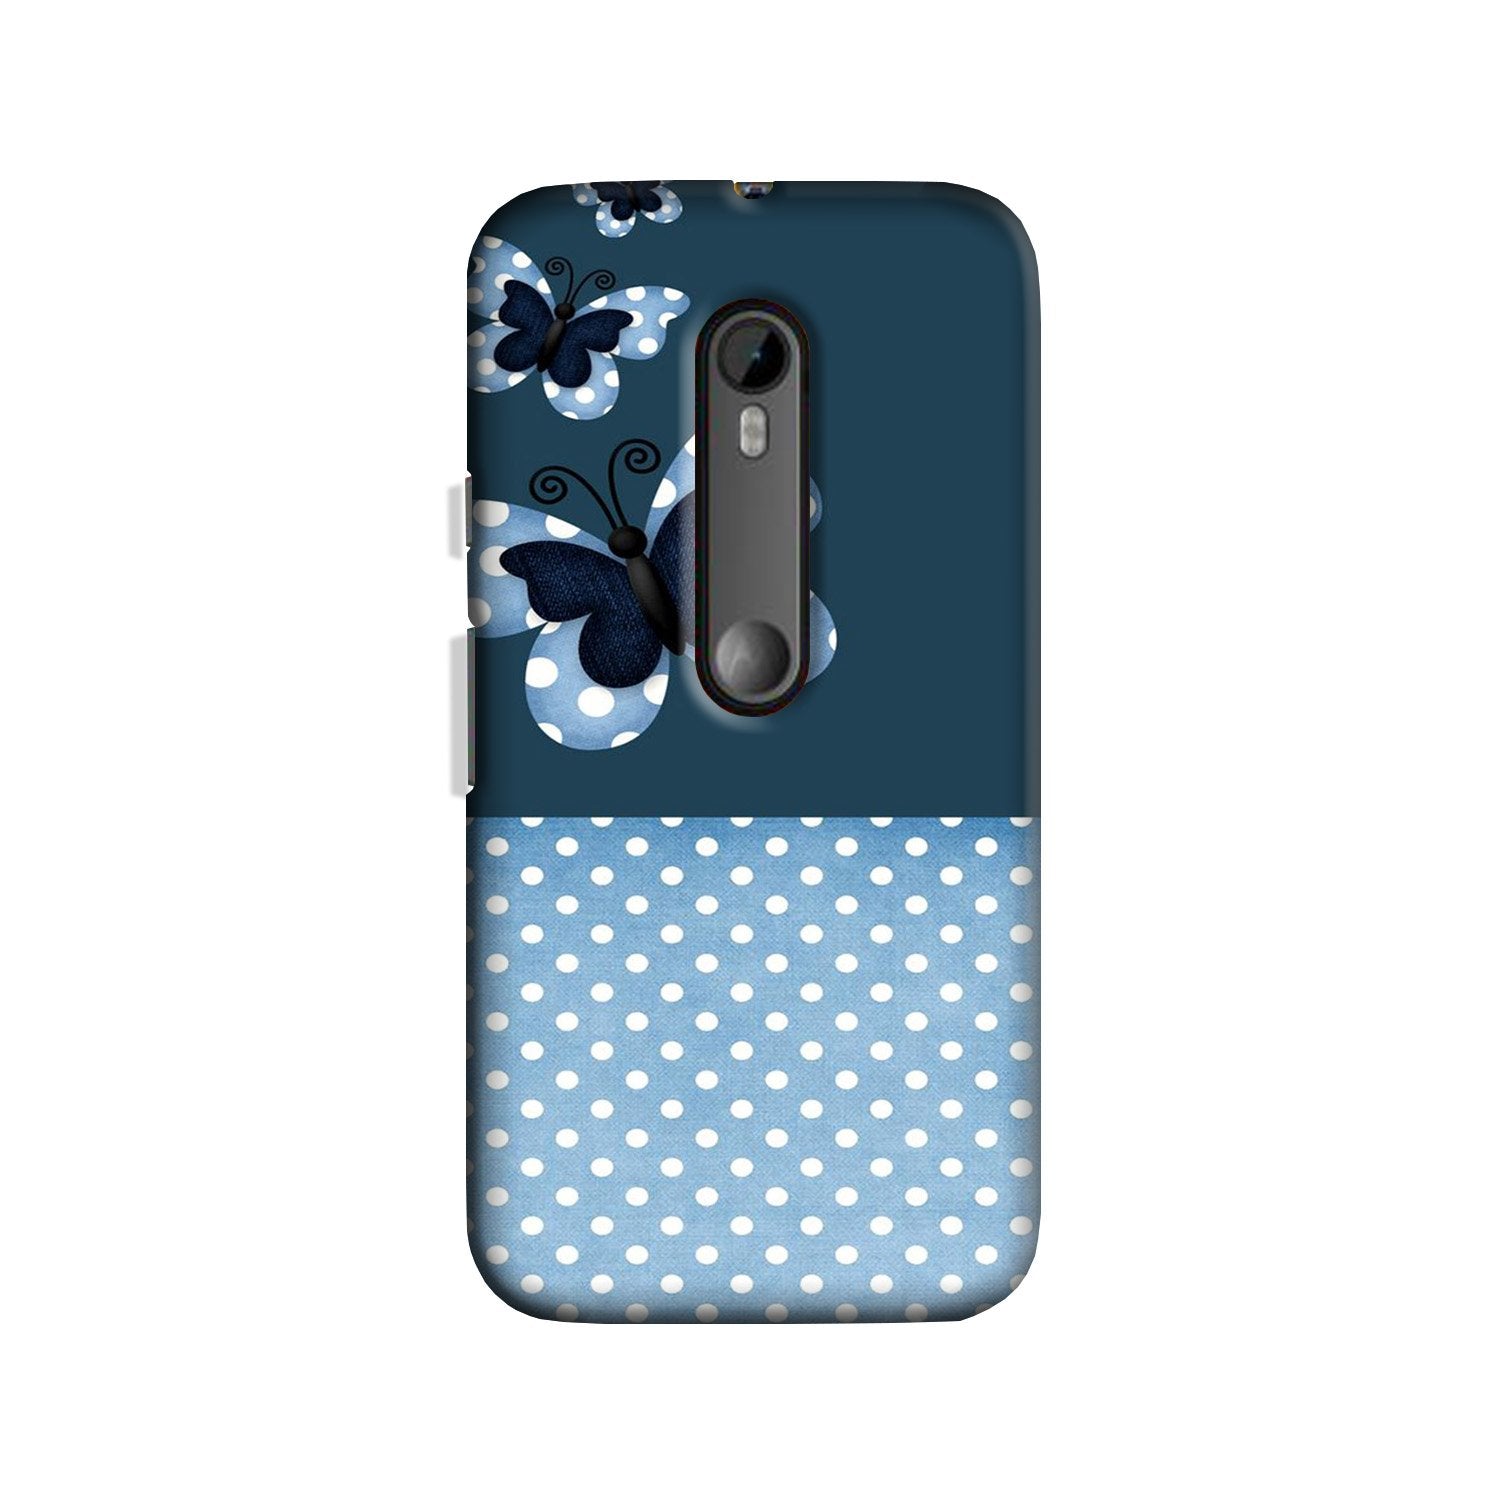 White dots Butterfly Case for Moto X Style